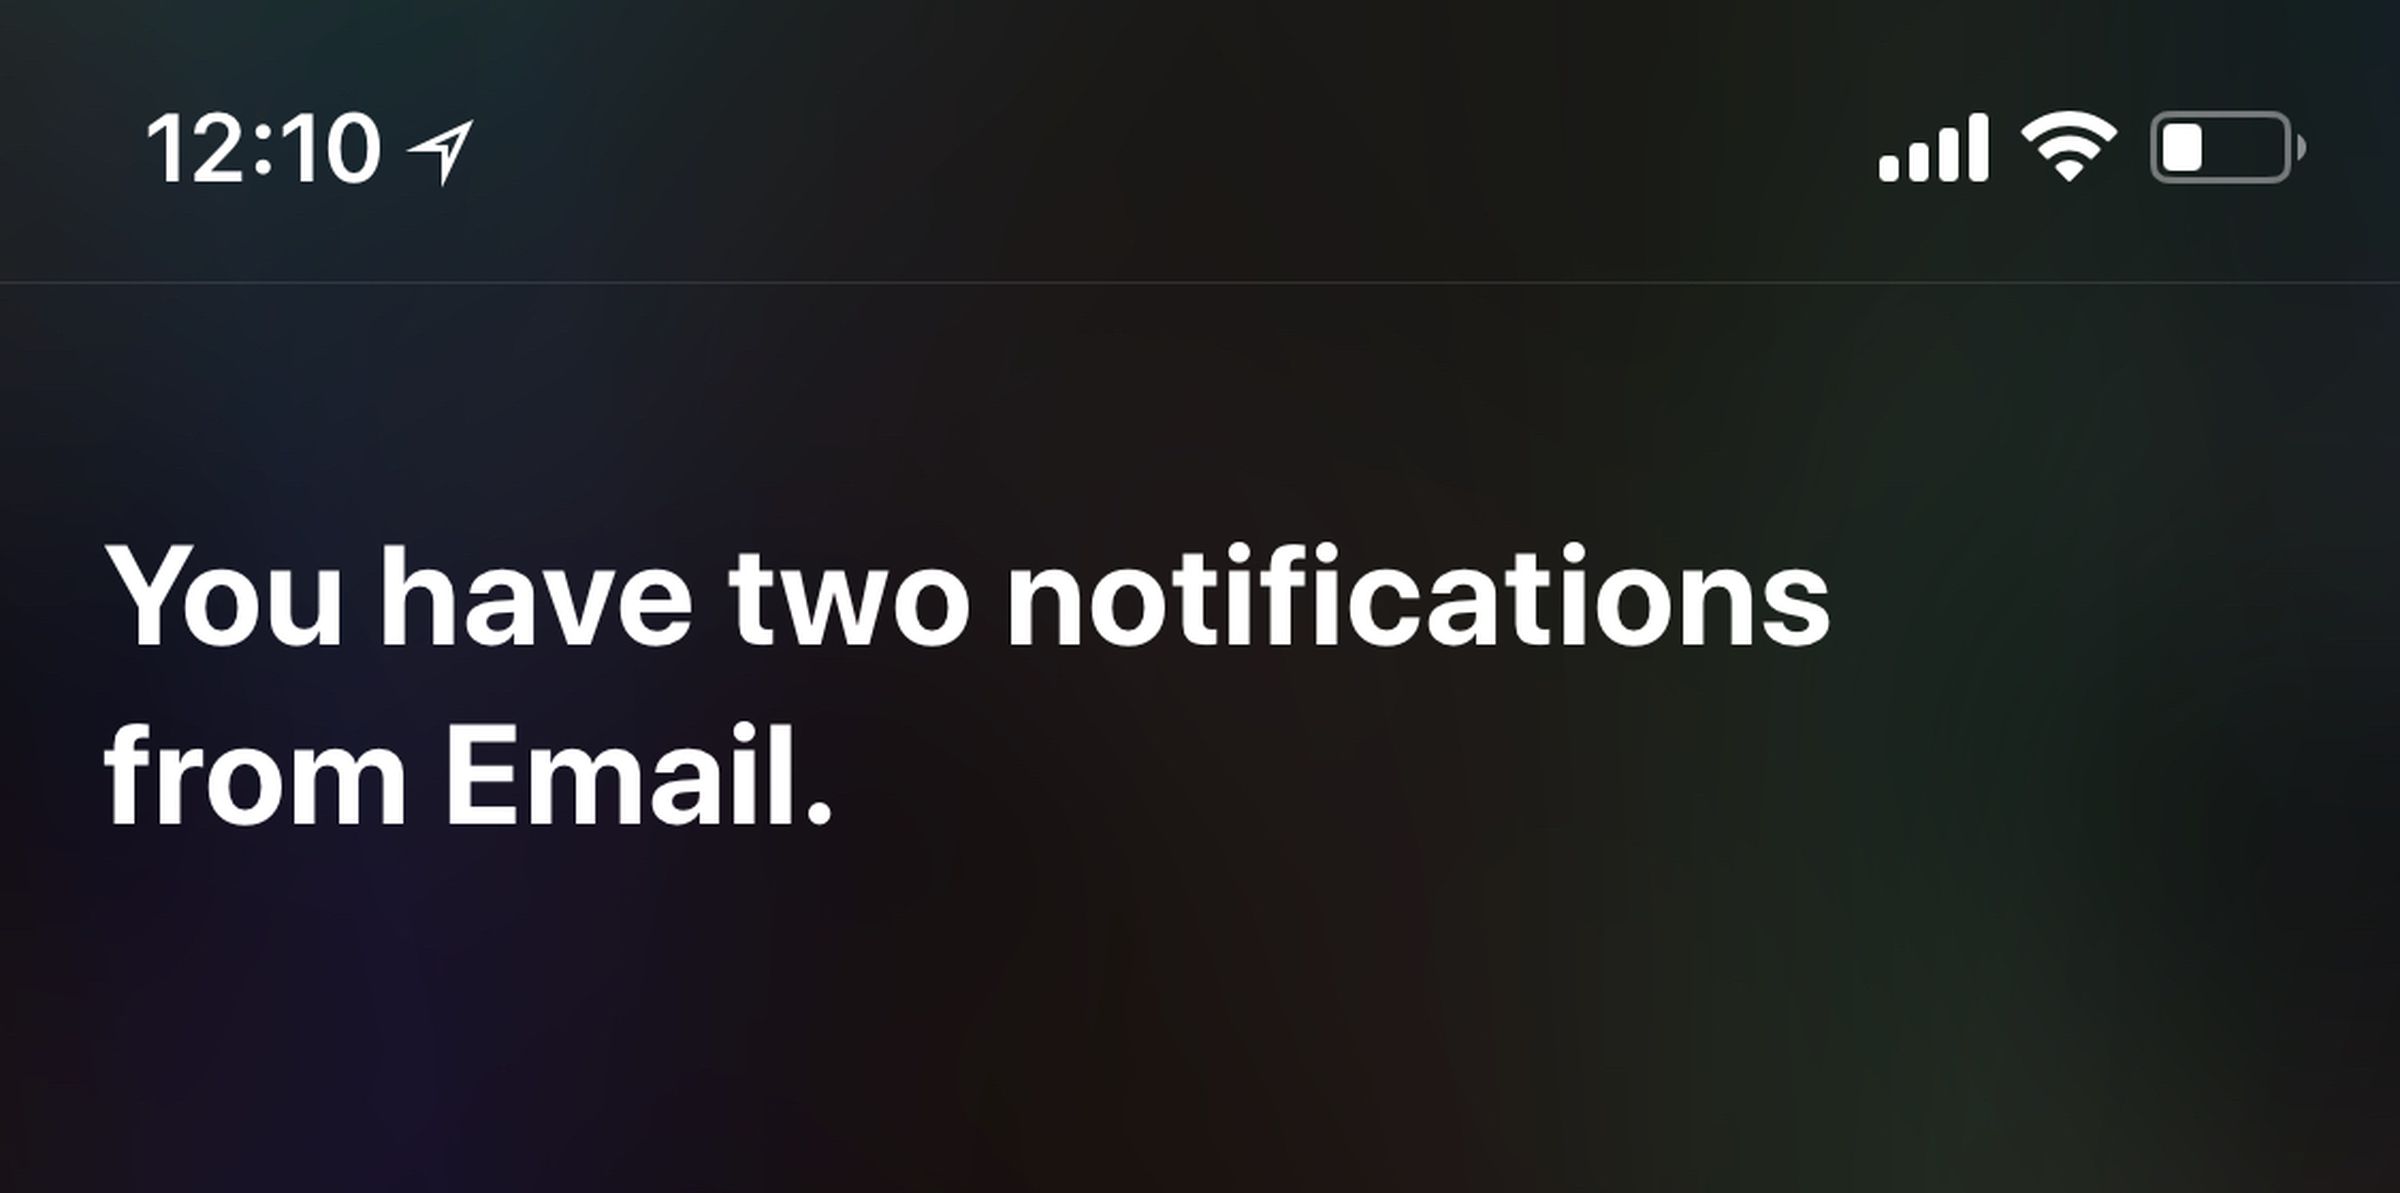 Even if lock screen previews are turned off, Siri will still read the content in notifications aloud from third-party email and messaging apps.